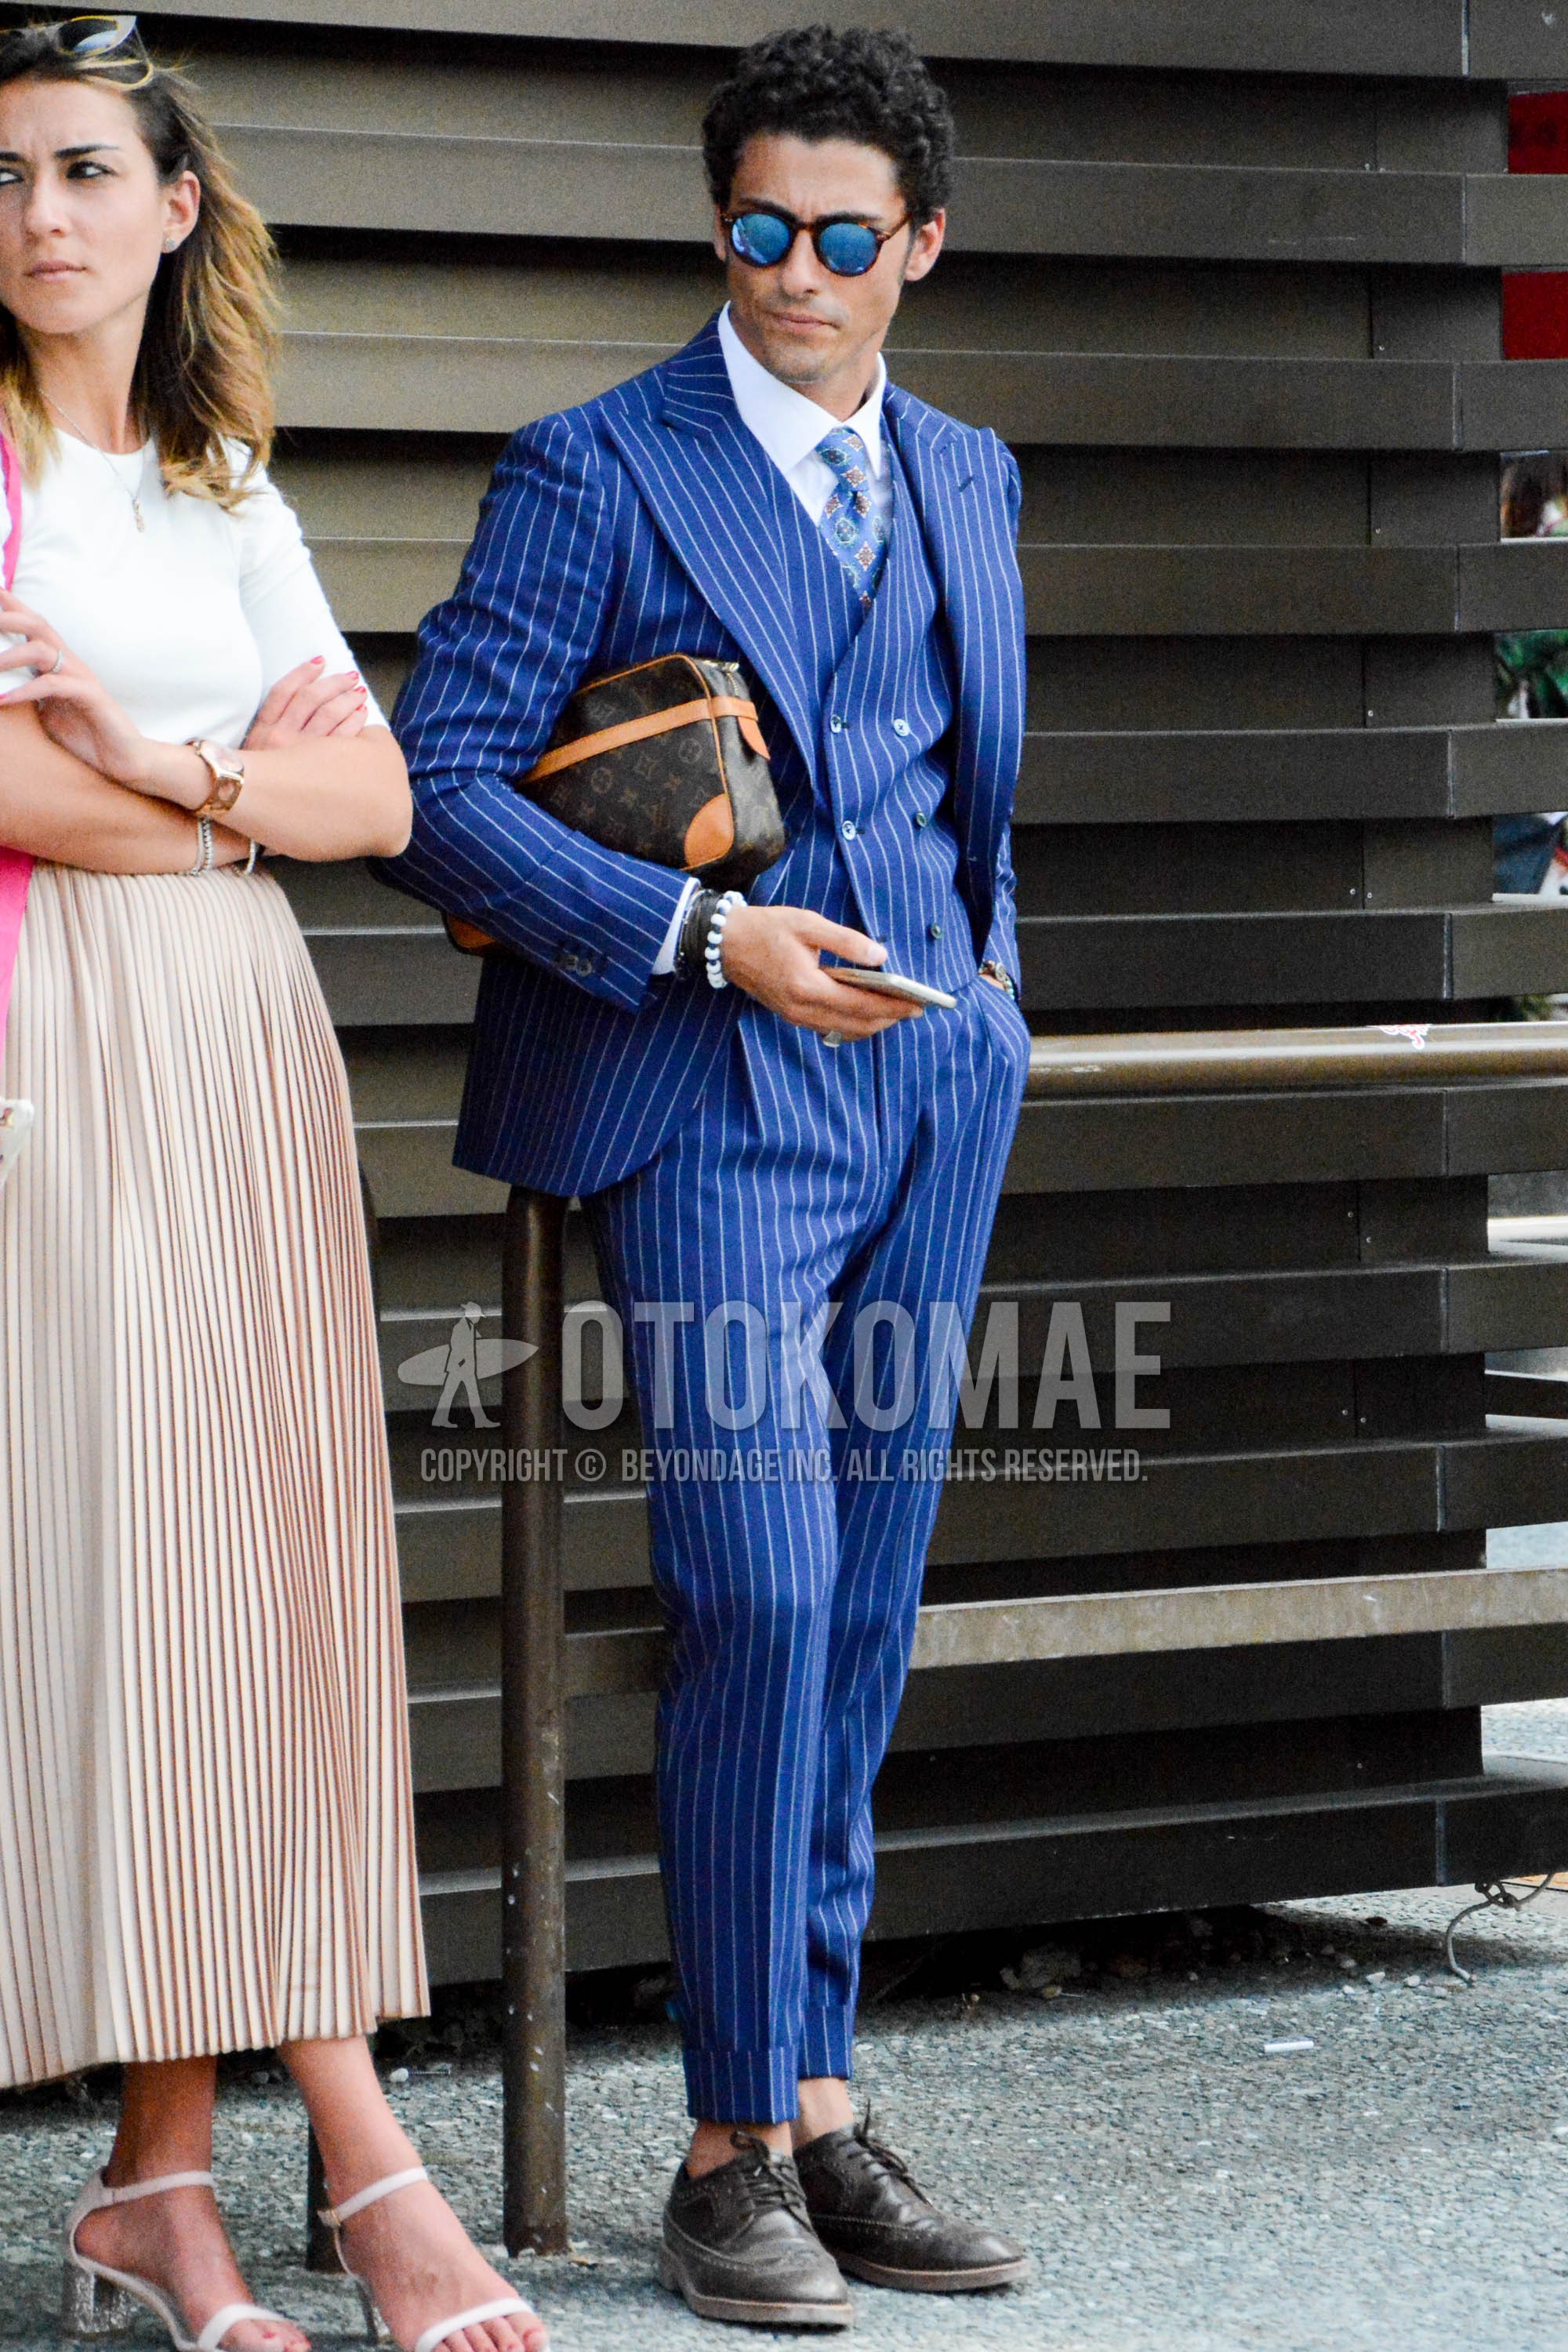 Men's spring autumn outfit with brown tortoiseshell sunglasses, white plain shirt, brown wing-tip shoes leather shoes, brown bag clutch bag/second bag/drawstring bag, navy stripes three-piece suit, blue small crest necktie.